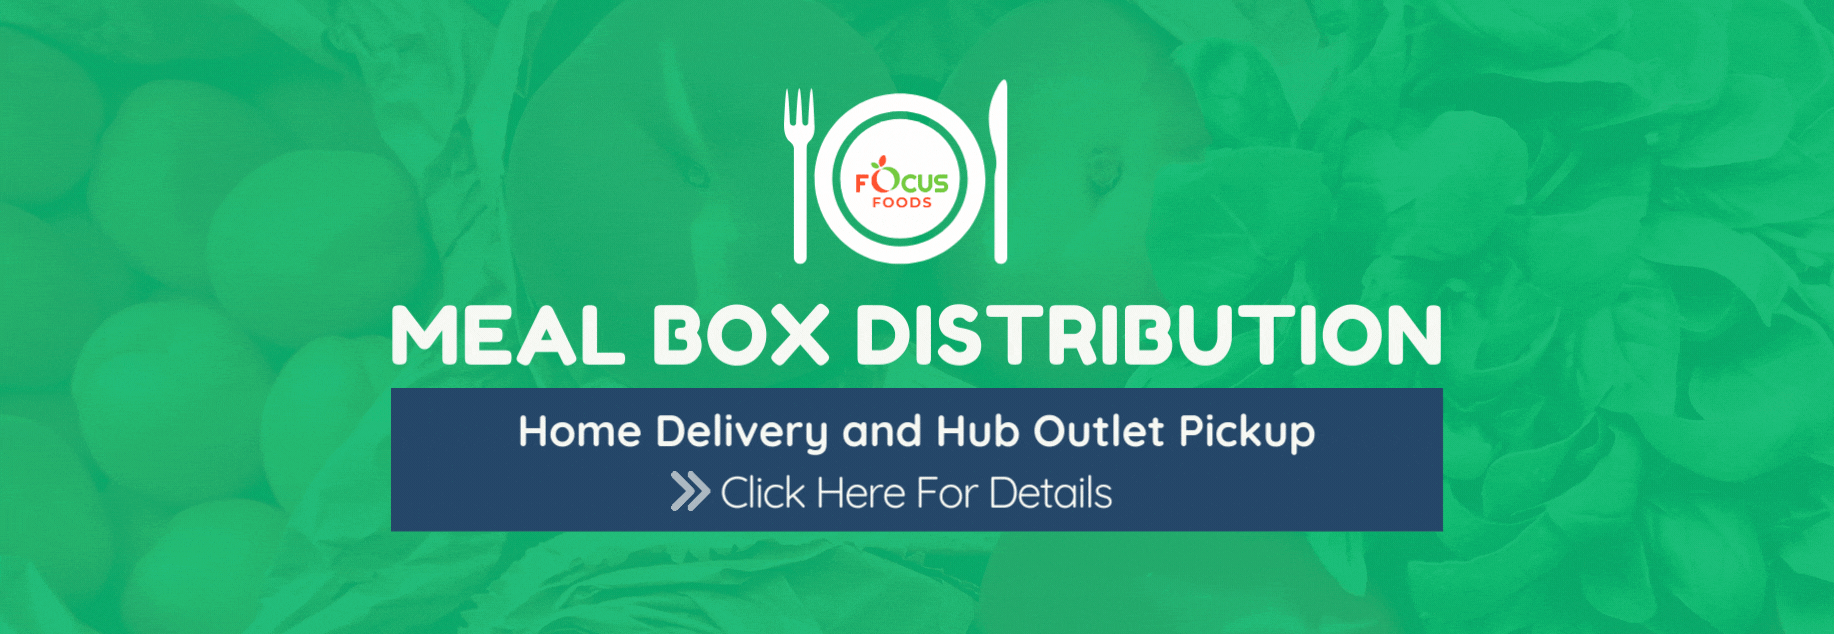 LPSS Announces New Meal Box Distribution: Home Delivery and Hub Outlet Pickup